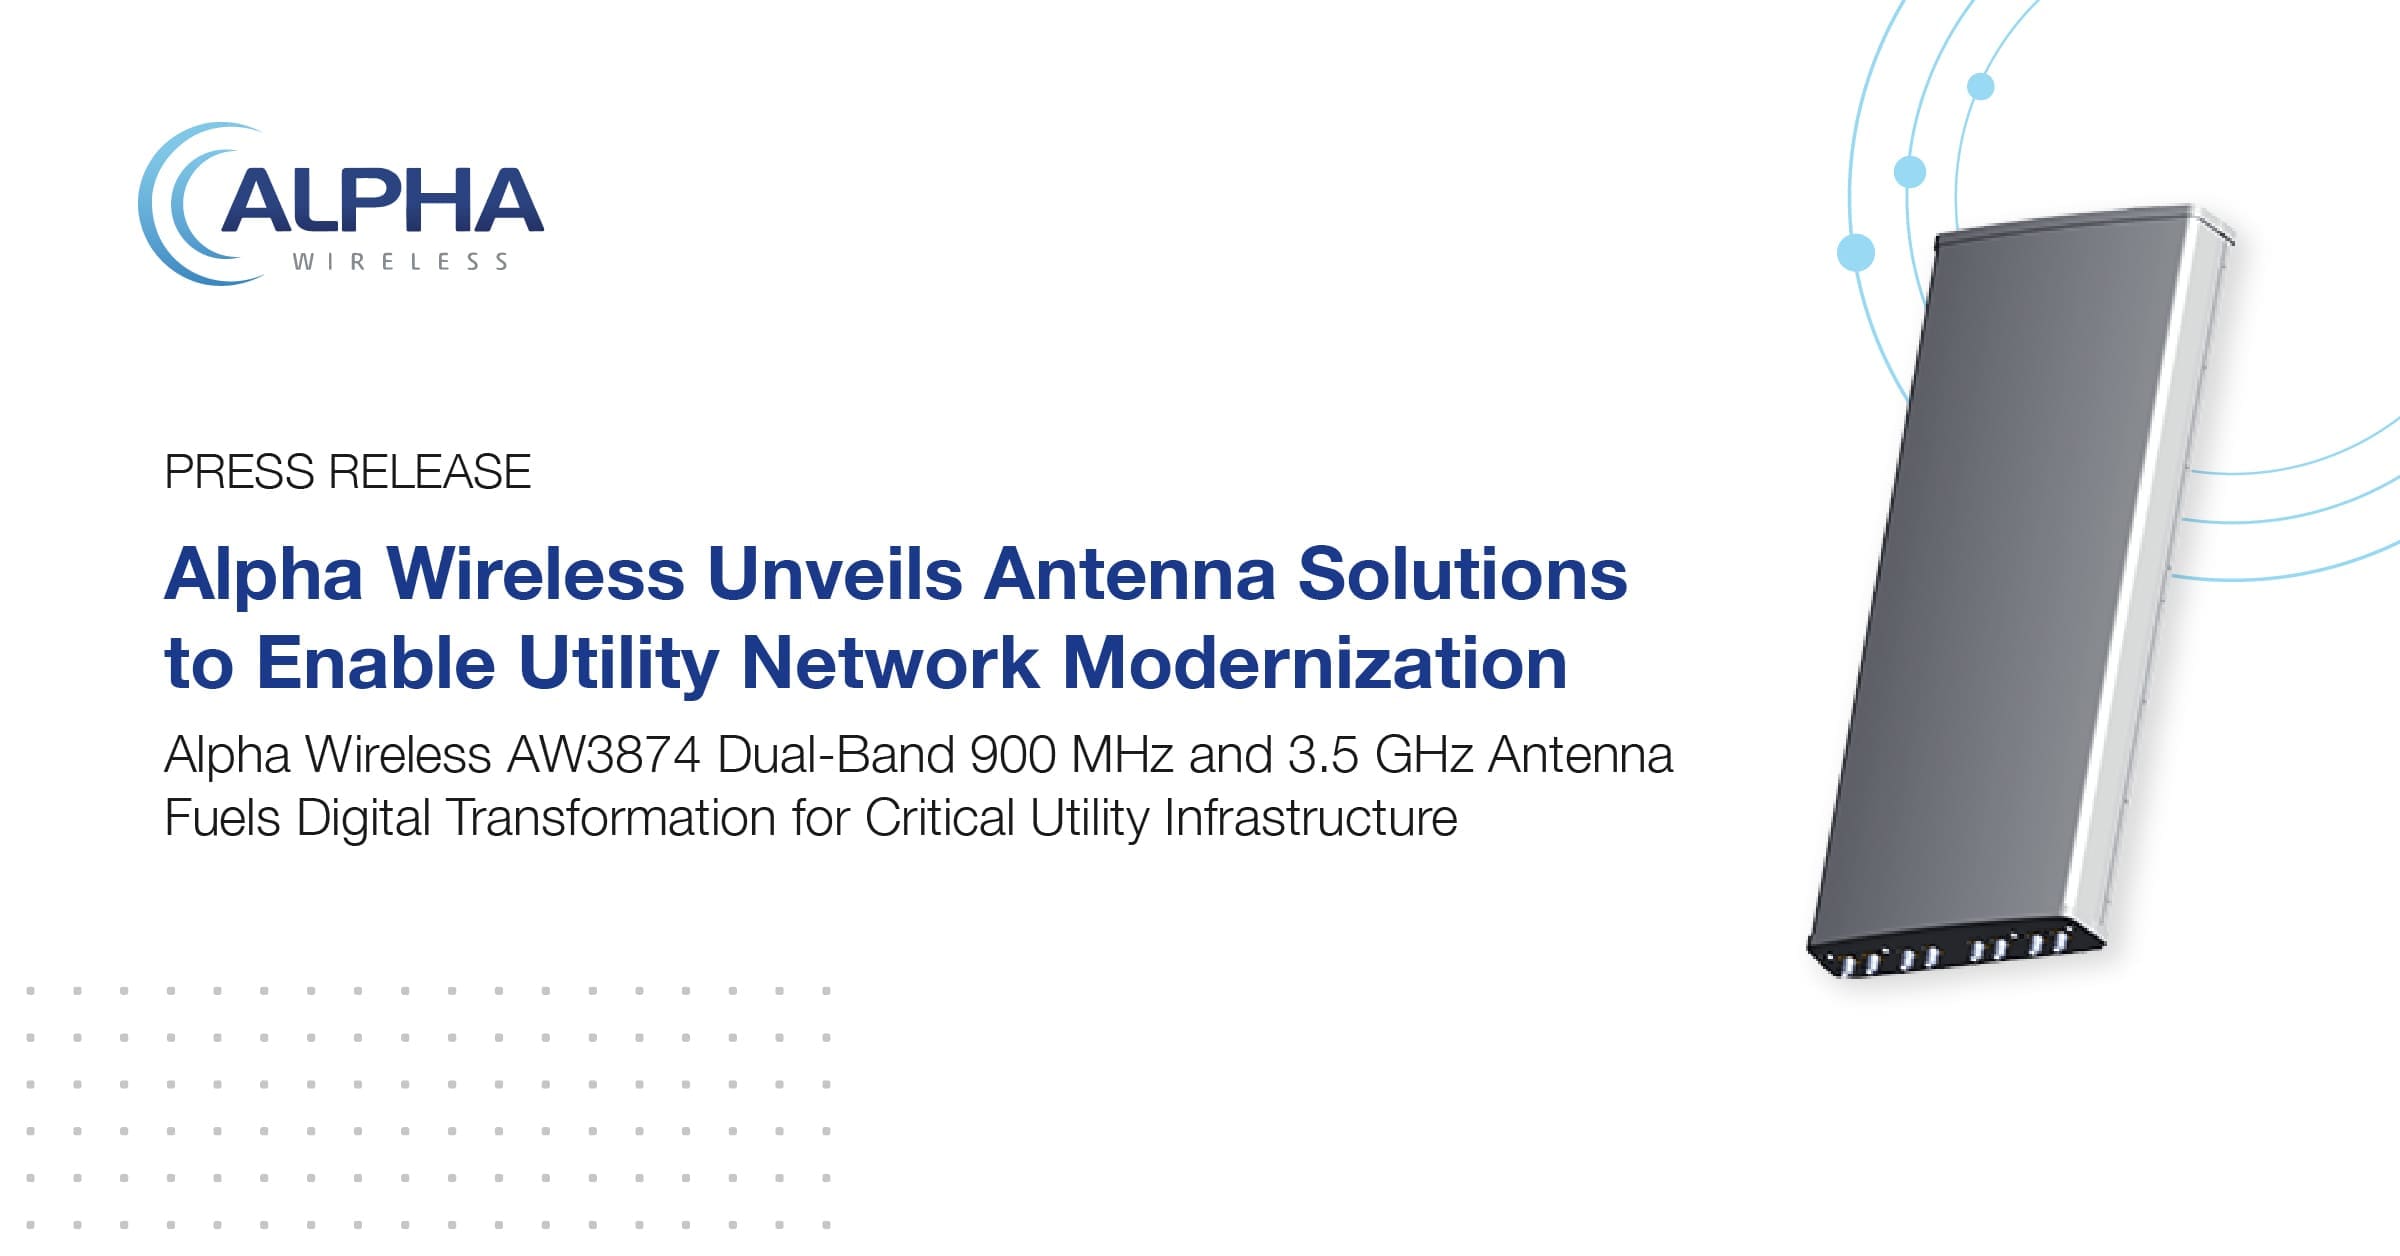 Alpha Wireless Unveils Antenna Solutions to Enable Utility Network Modernization